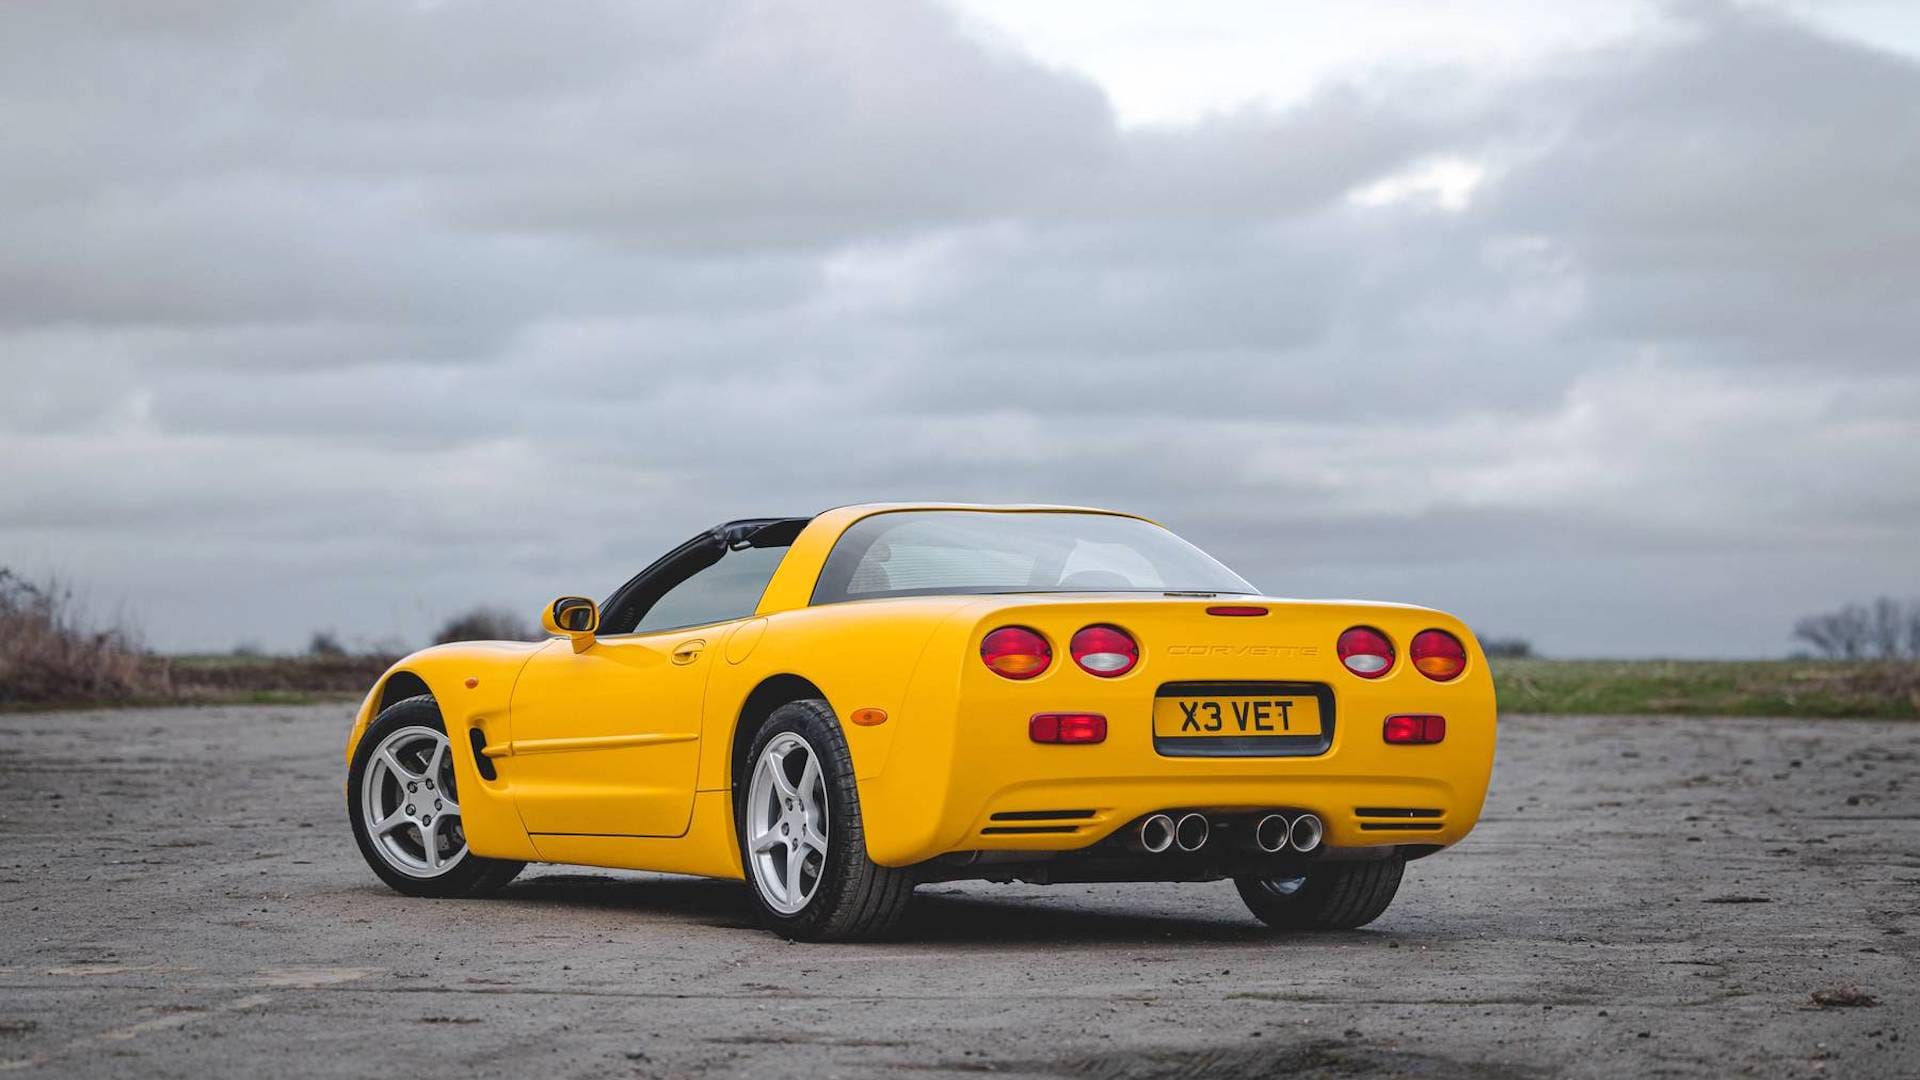 Rare right-hand-drive Chevrolet Corvette up for auction